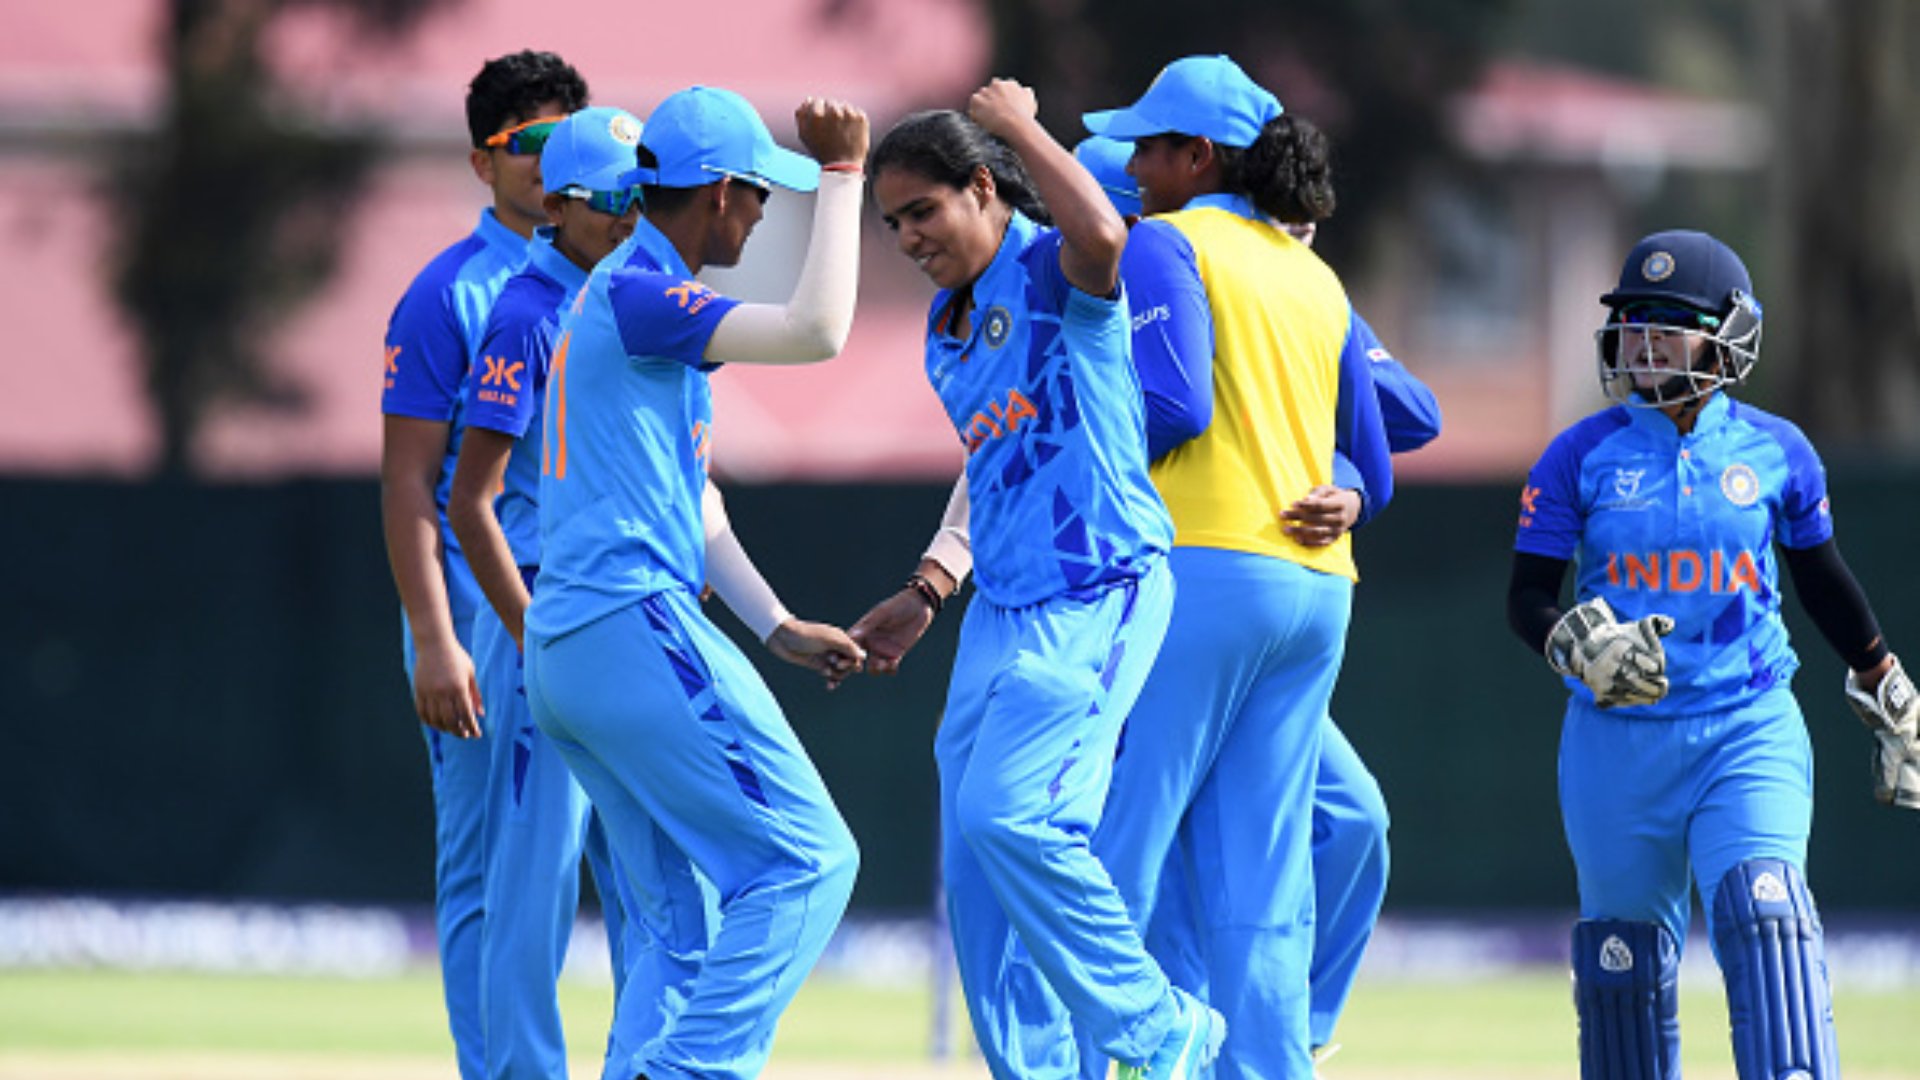 India Under 19 Women’s Team End Group Stage With 3 Out Of 3 Wins